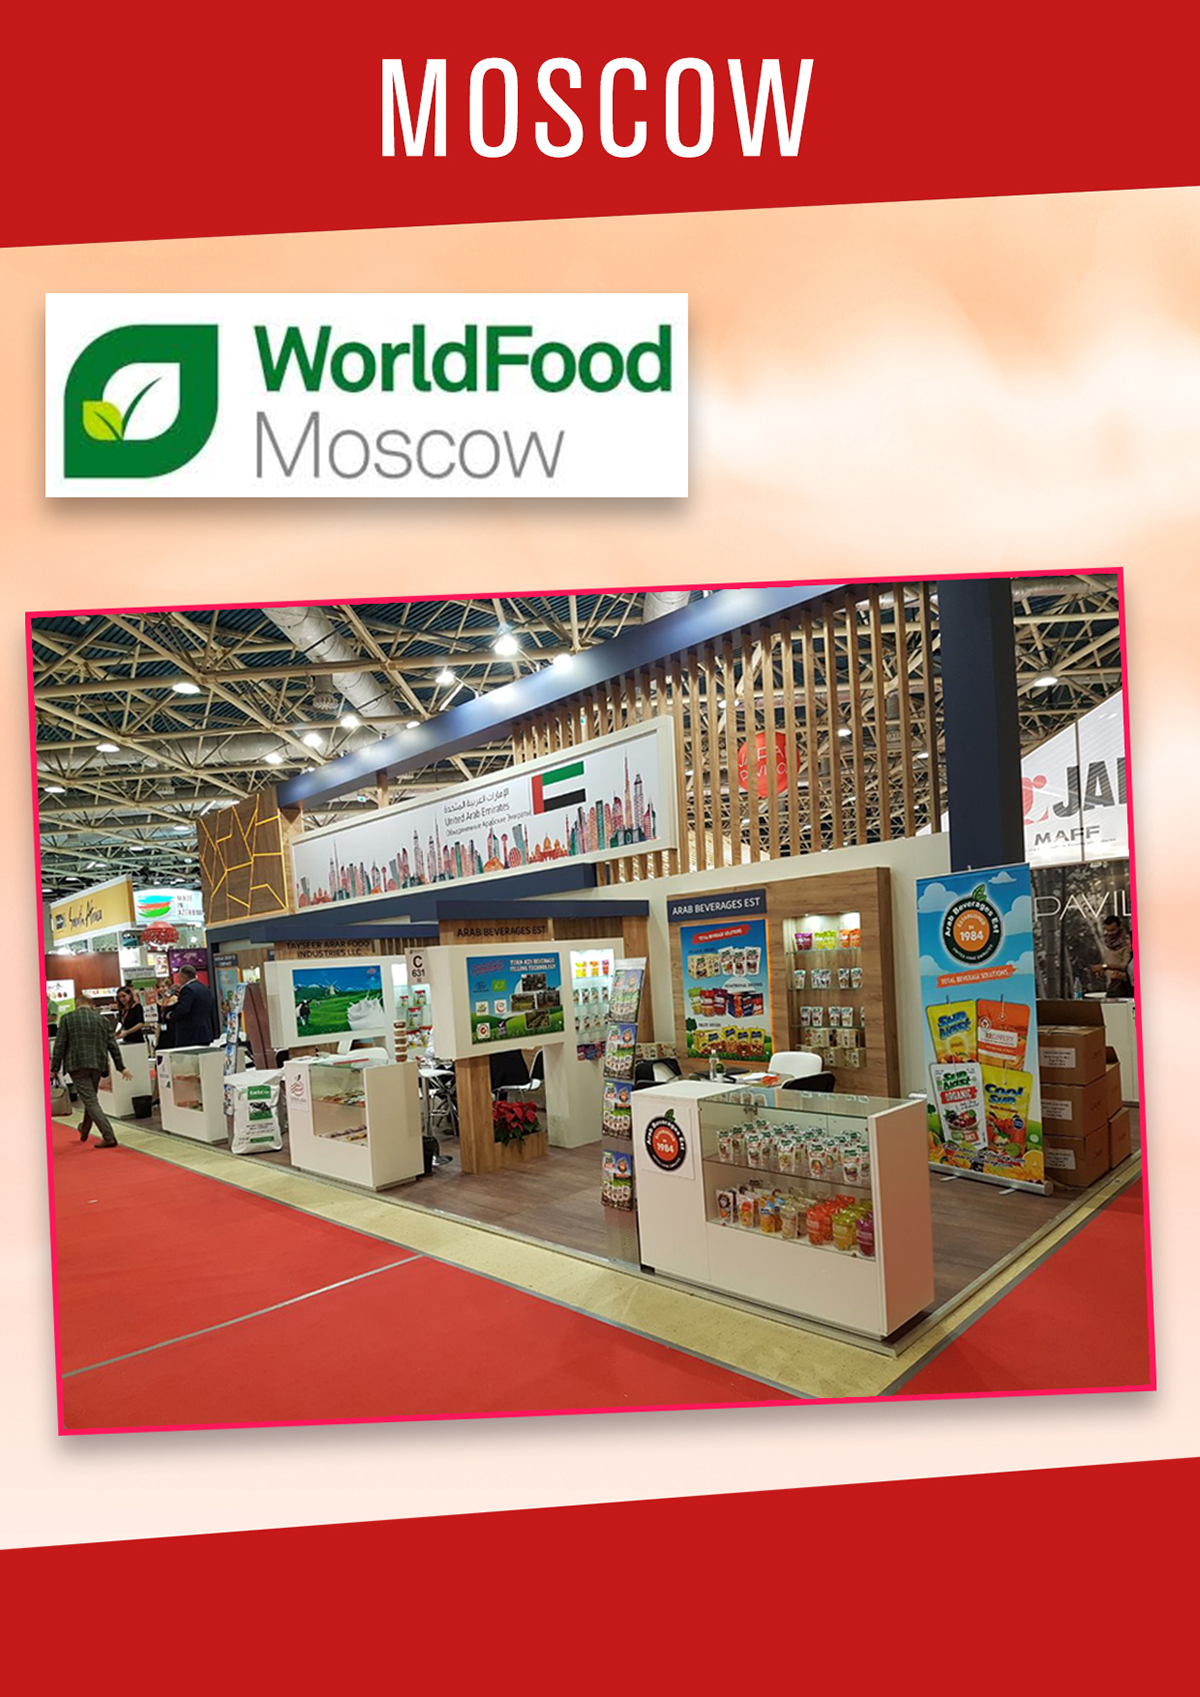 //www.arabbeverages.com/wp-content/uploads/2018/04/moscow.jpg